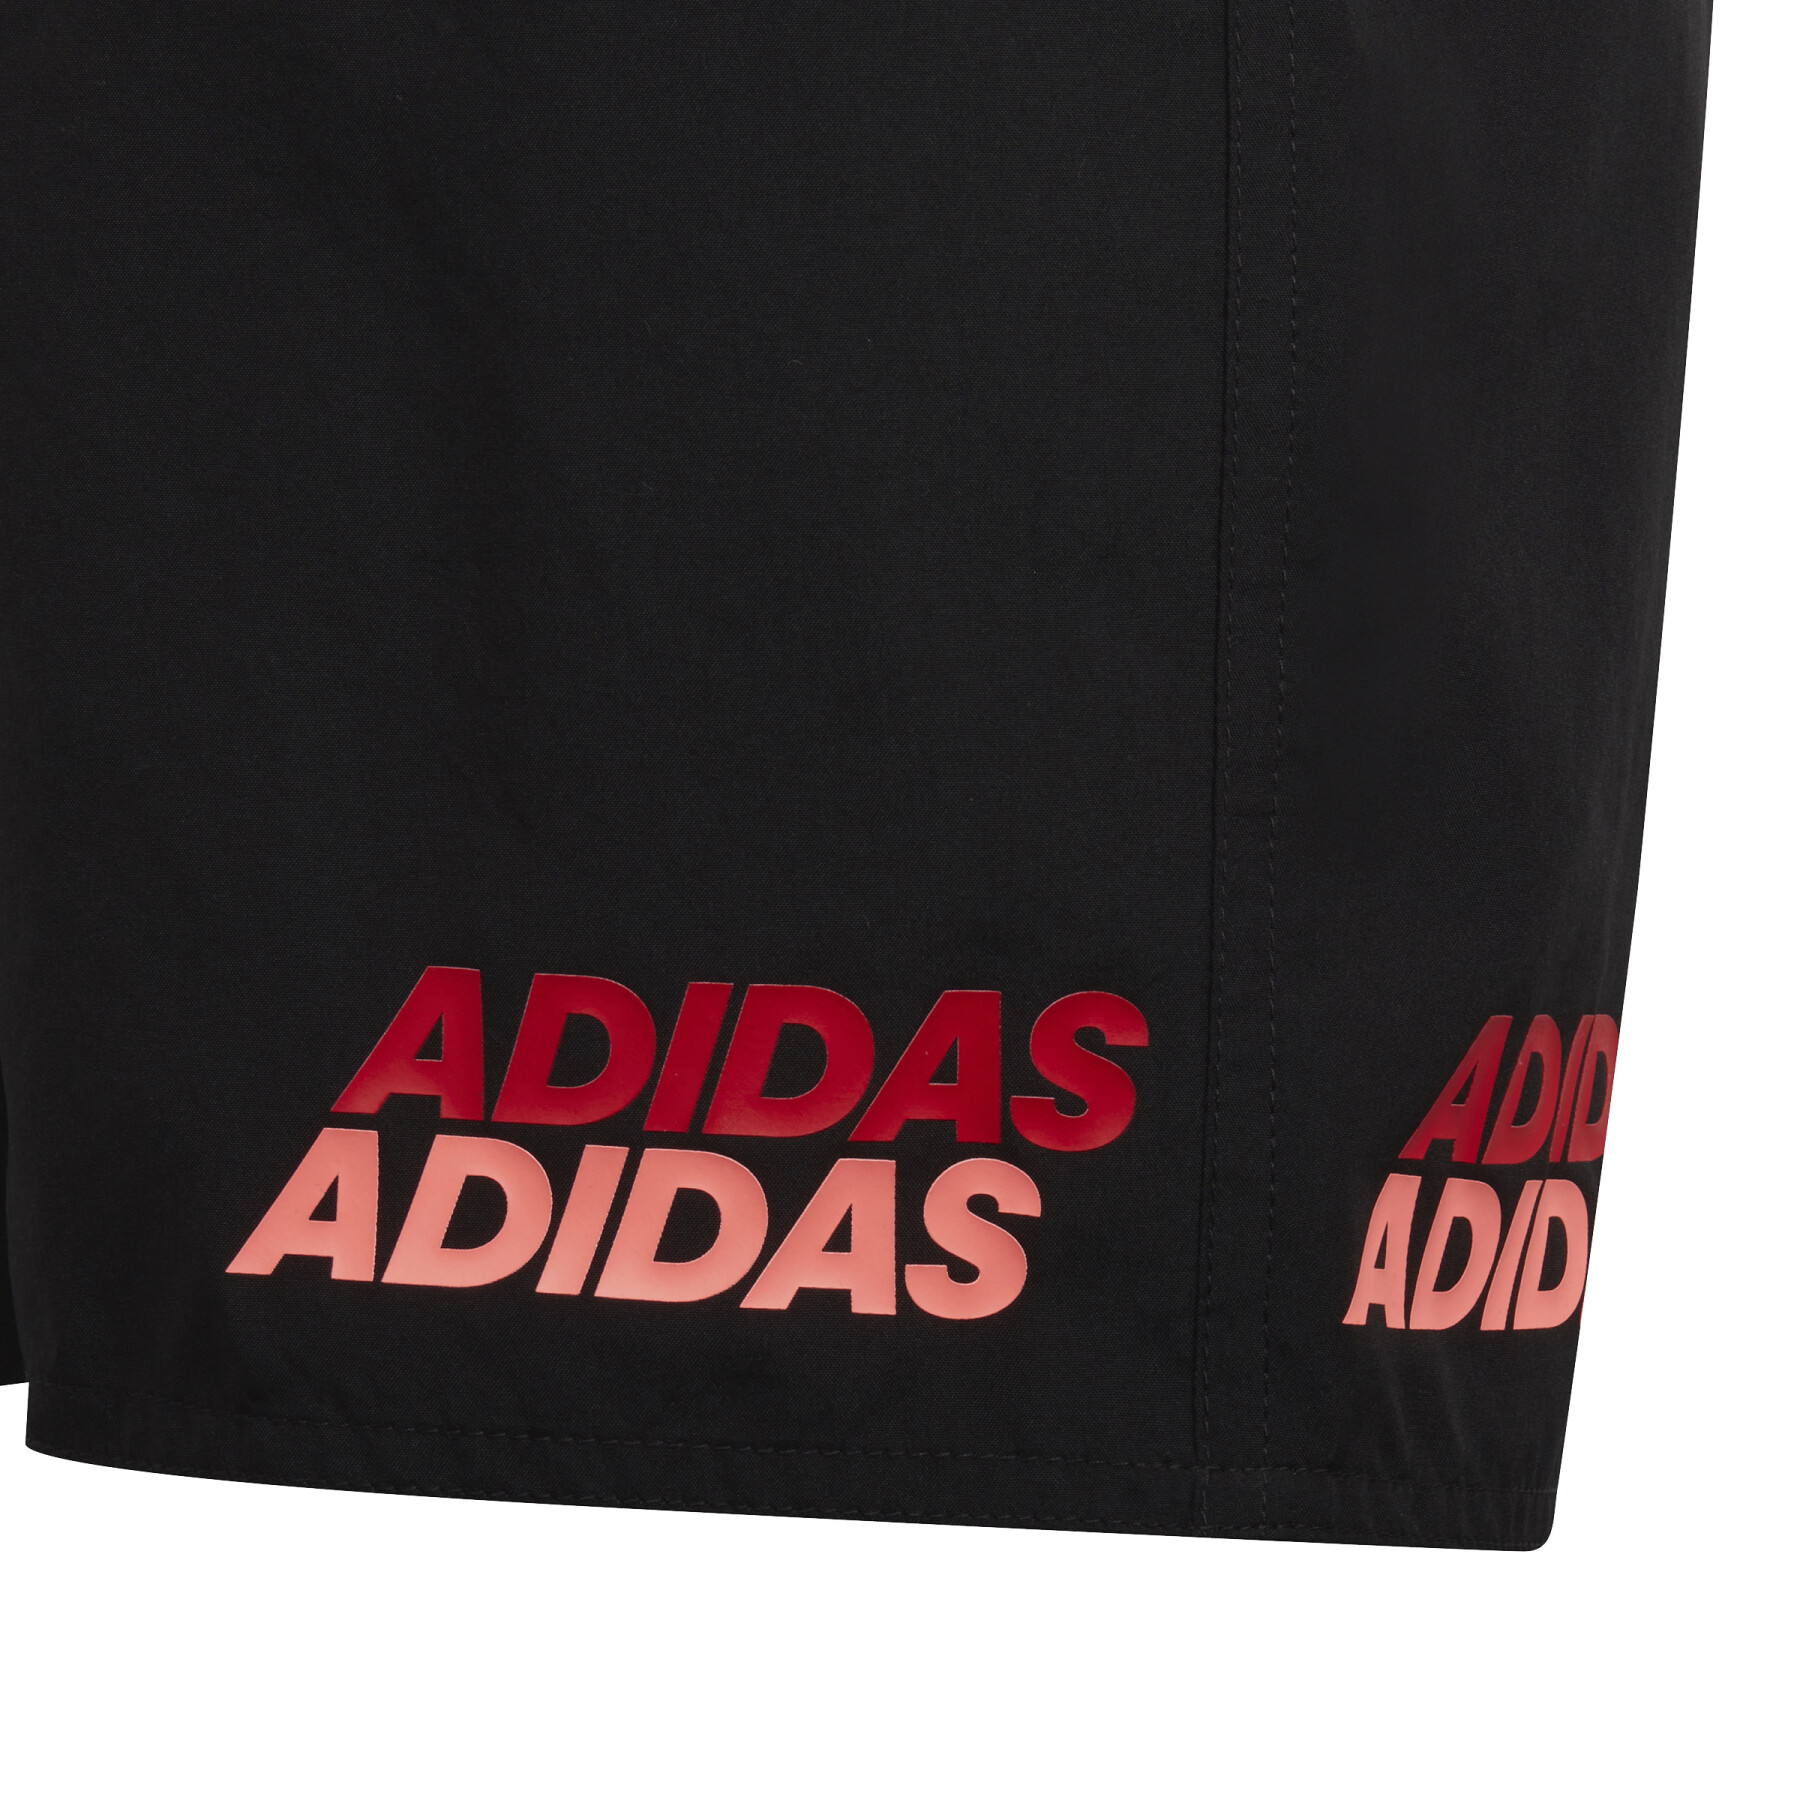 Children's shorts adidas Lineage